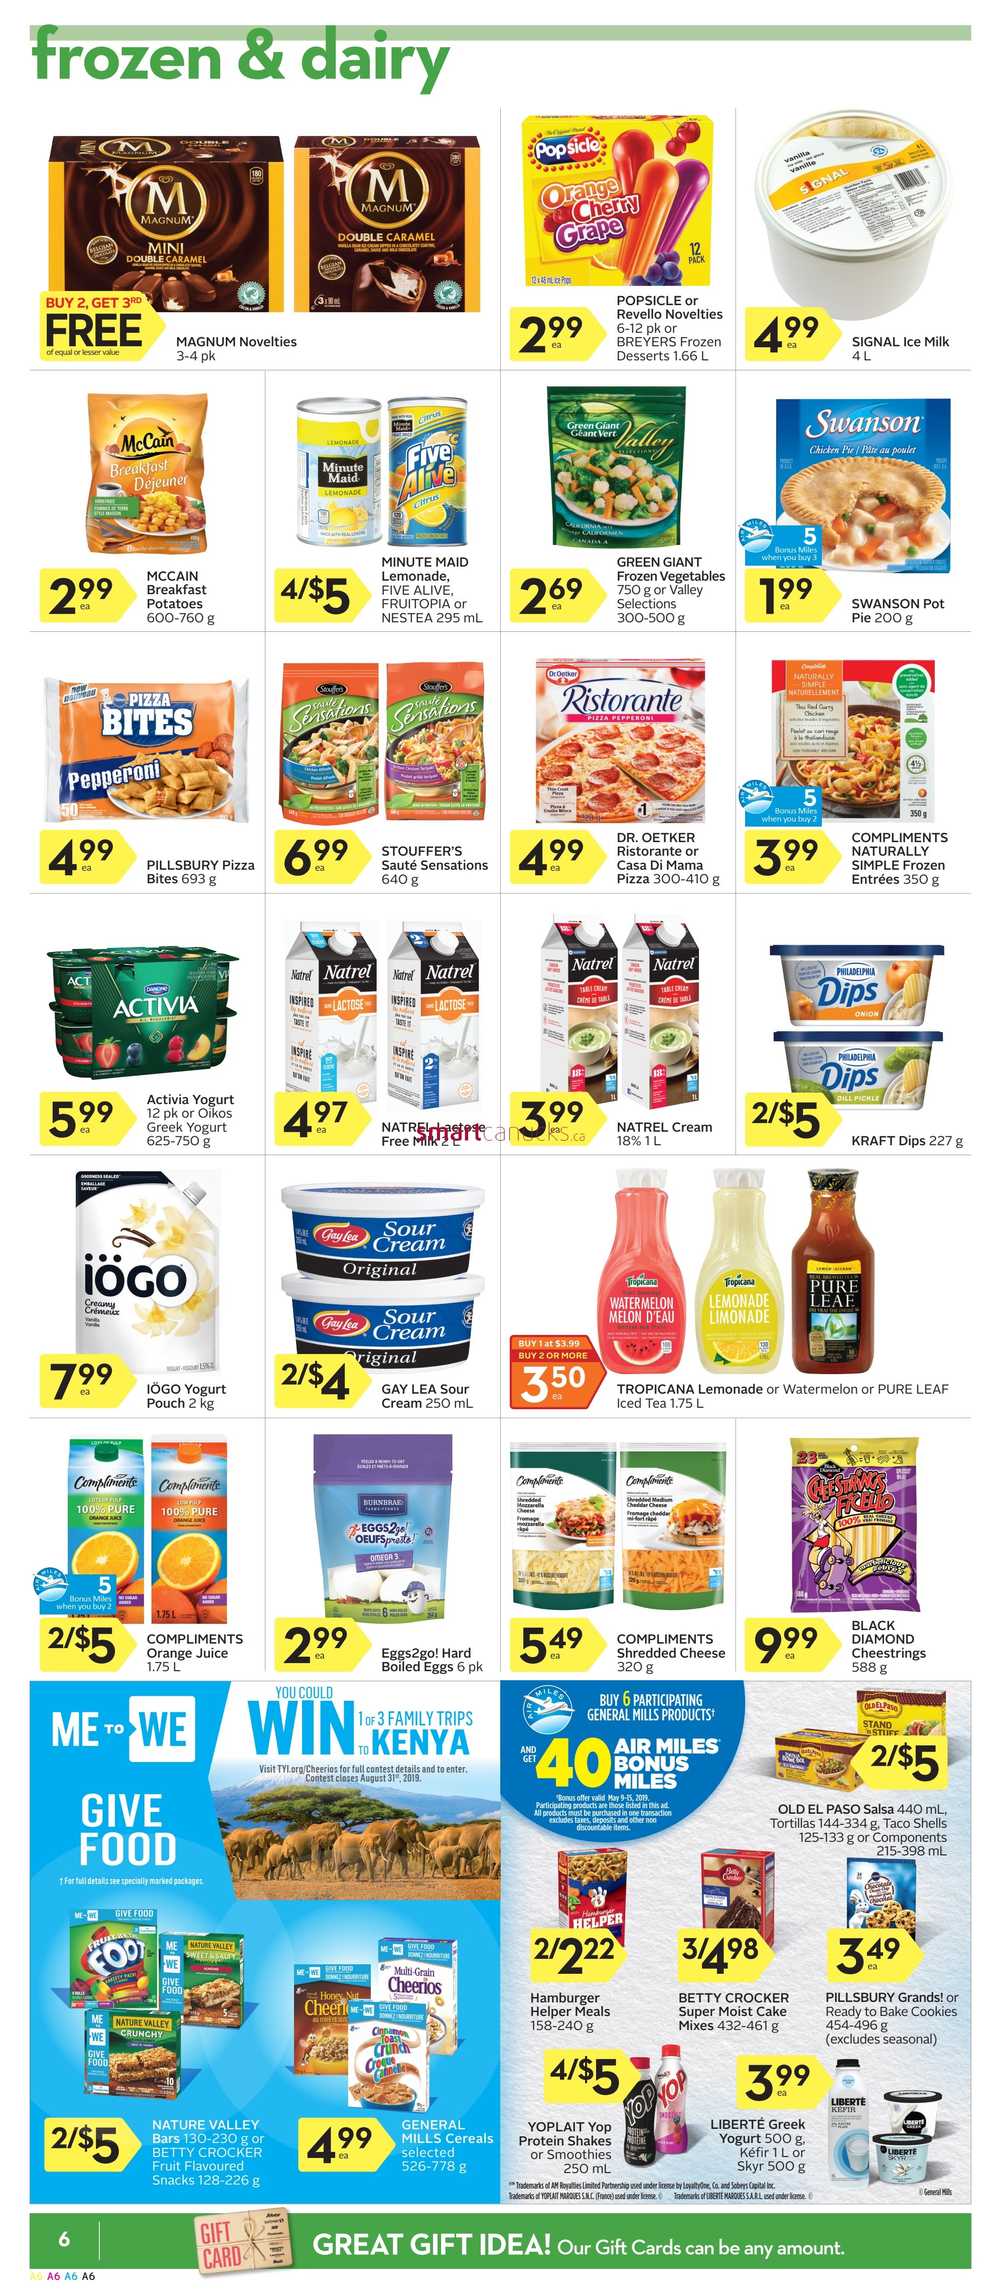 sobeys-on-flyer-may-9-to-152-7.jpg